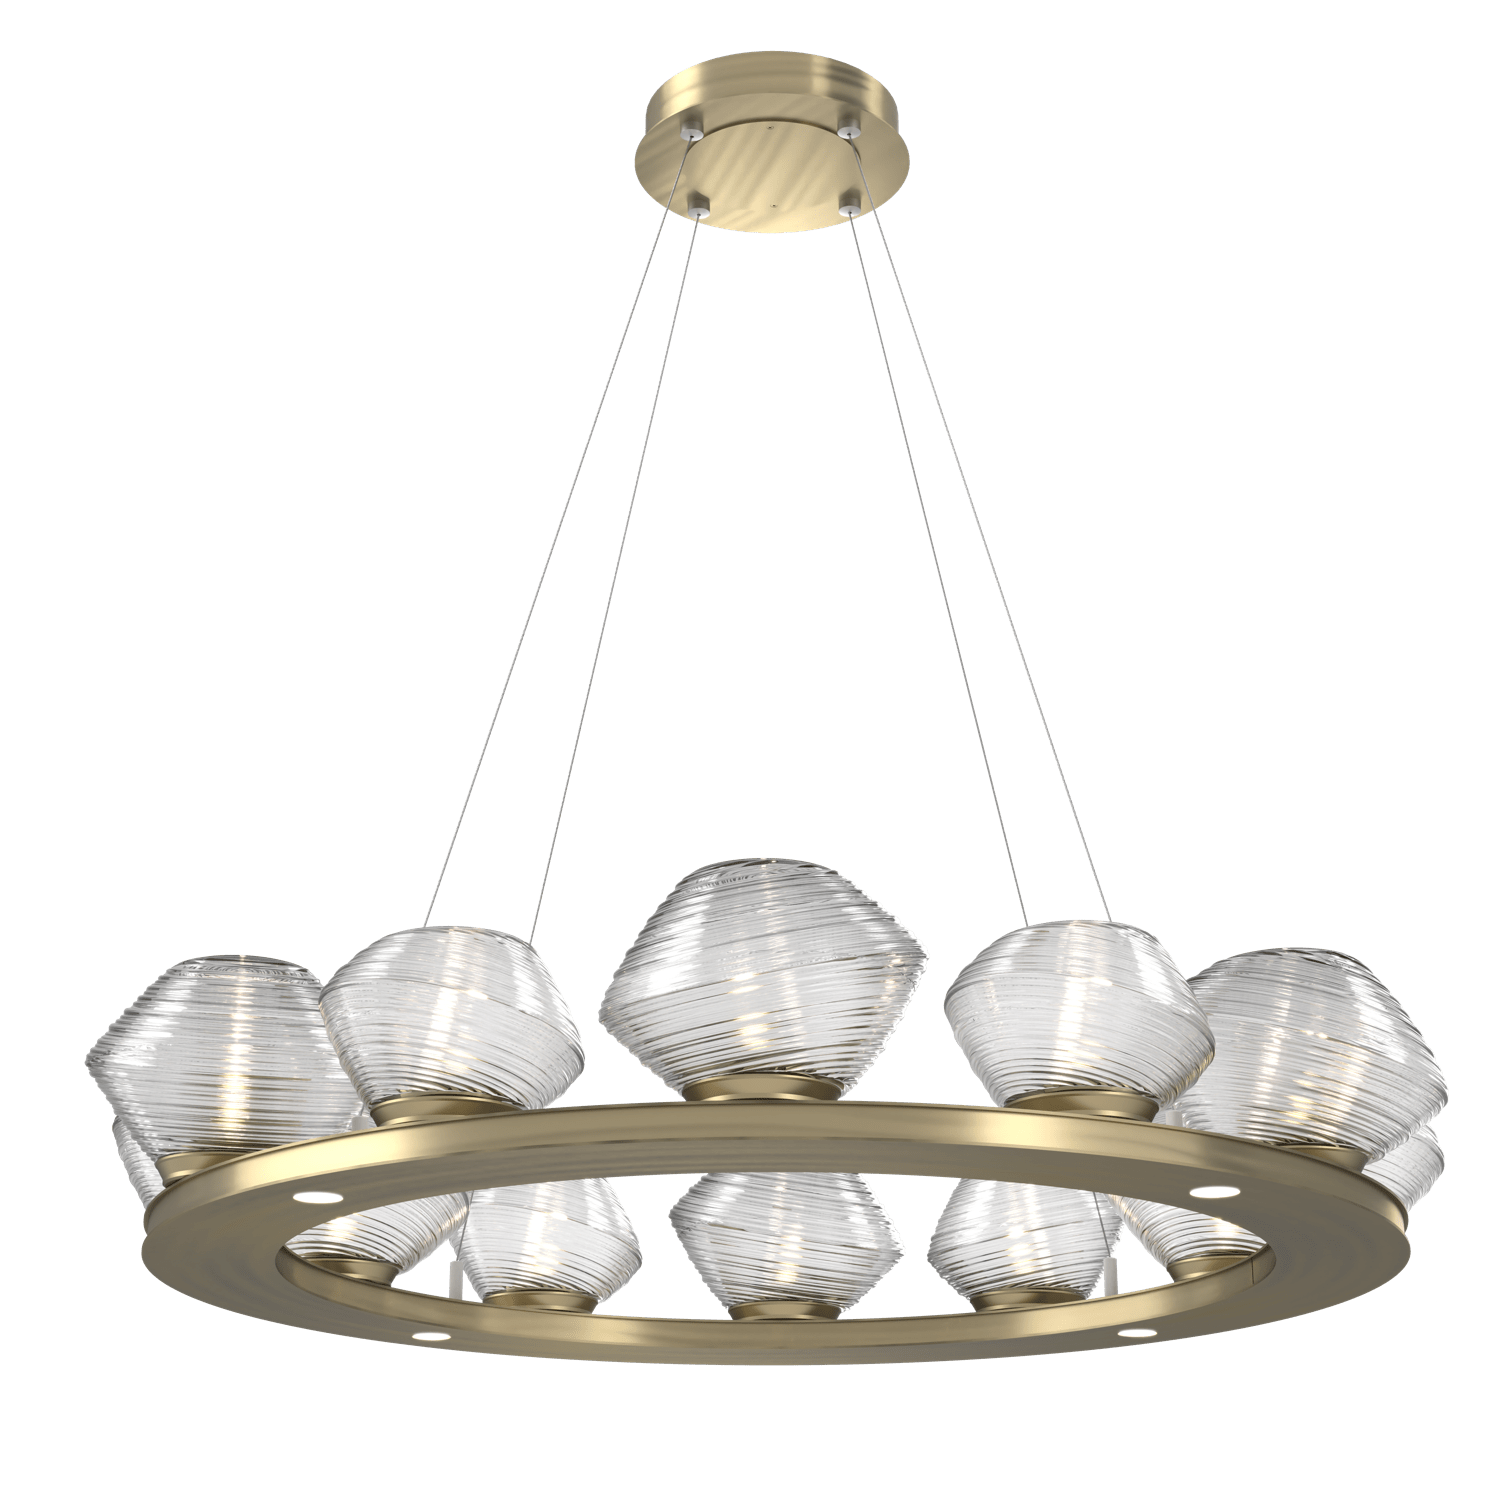 CHB0089-0C-HB-C-Hammerton-Studio-Mesa-36-inch-ring-chandelier-with-heritage-brass-finish-and-clear-blown-glass-shades-and-LED-lamping